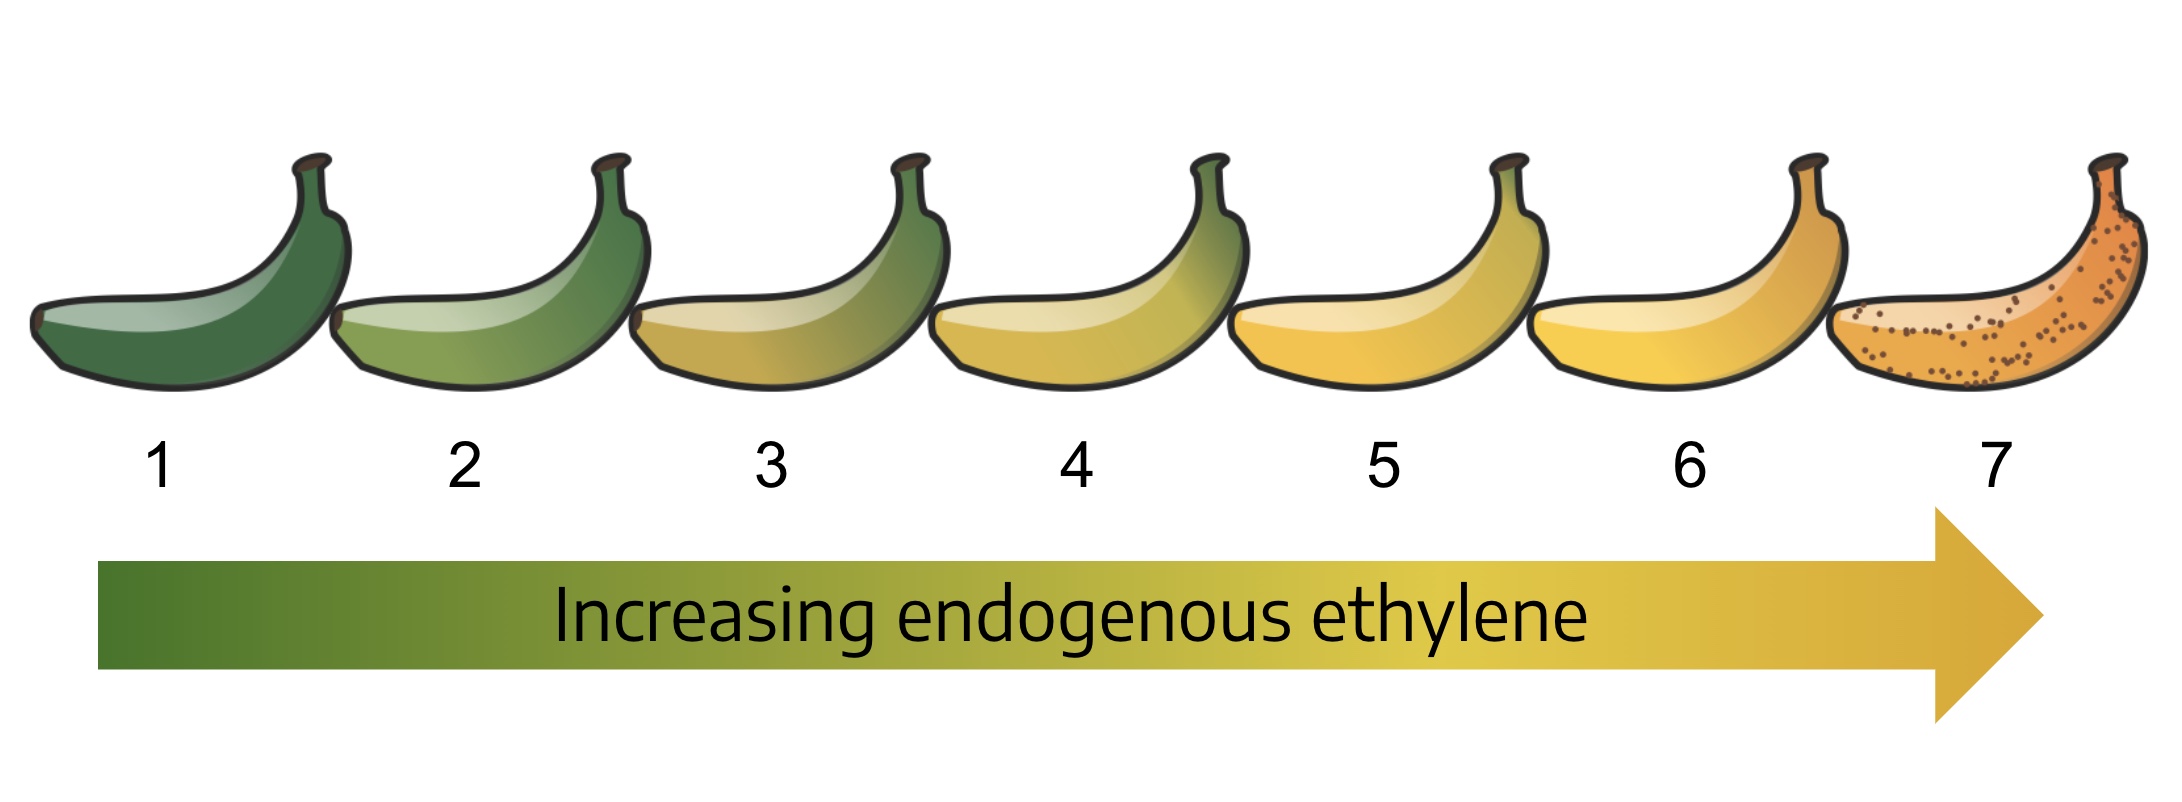 Seven ripening stages of banana.